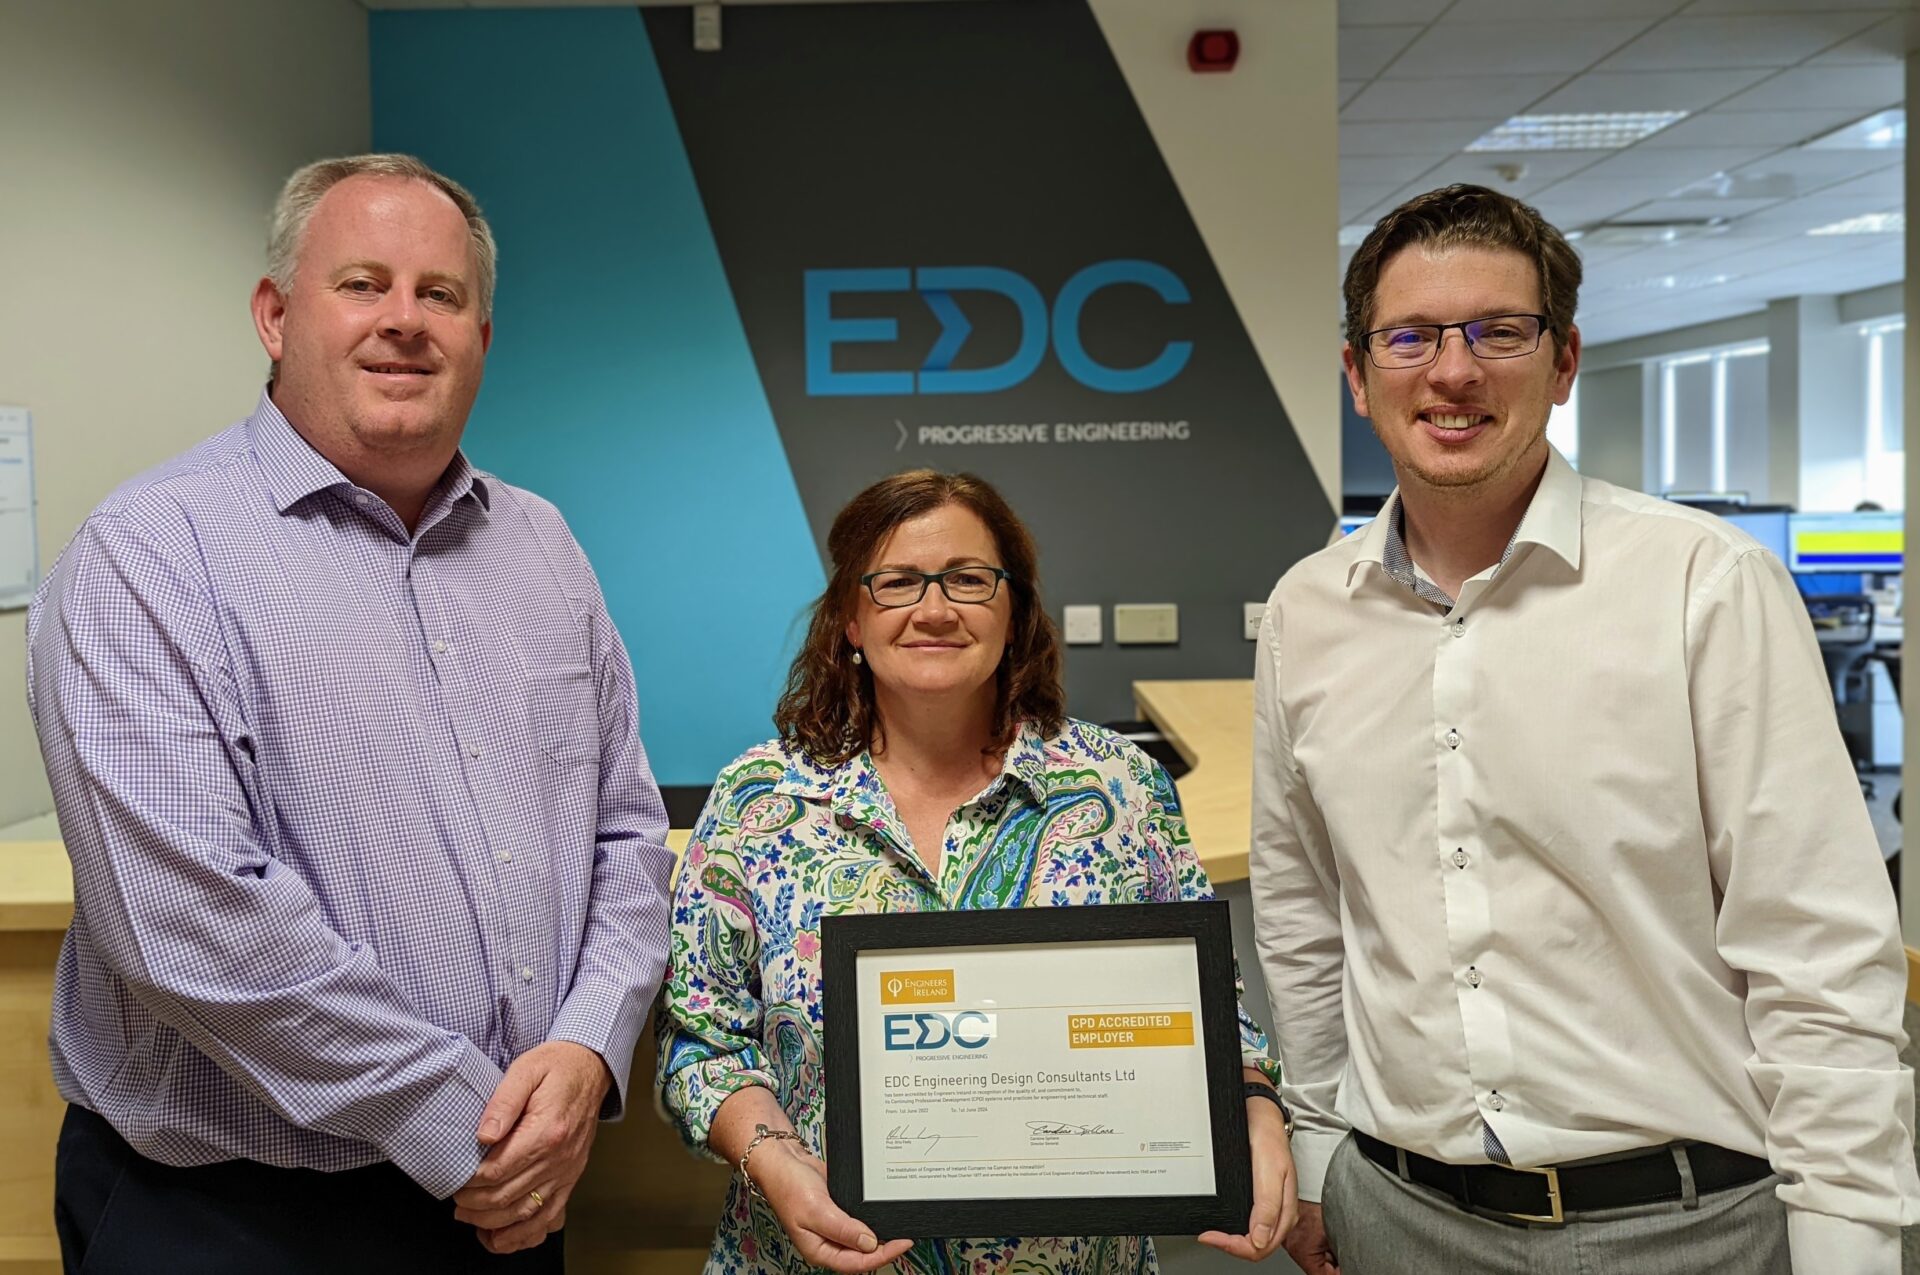 EDC has been awarded the CPD Accredited Employer Standard by Engineers Ireland